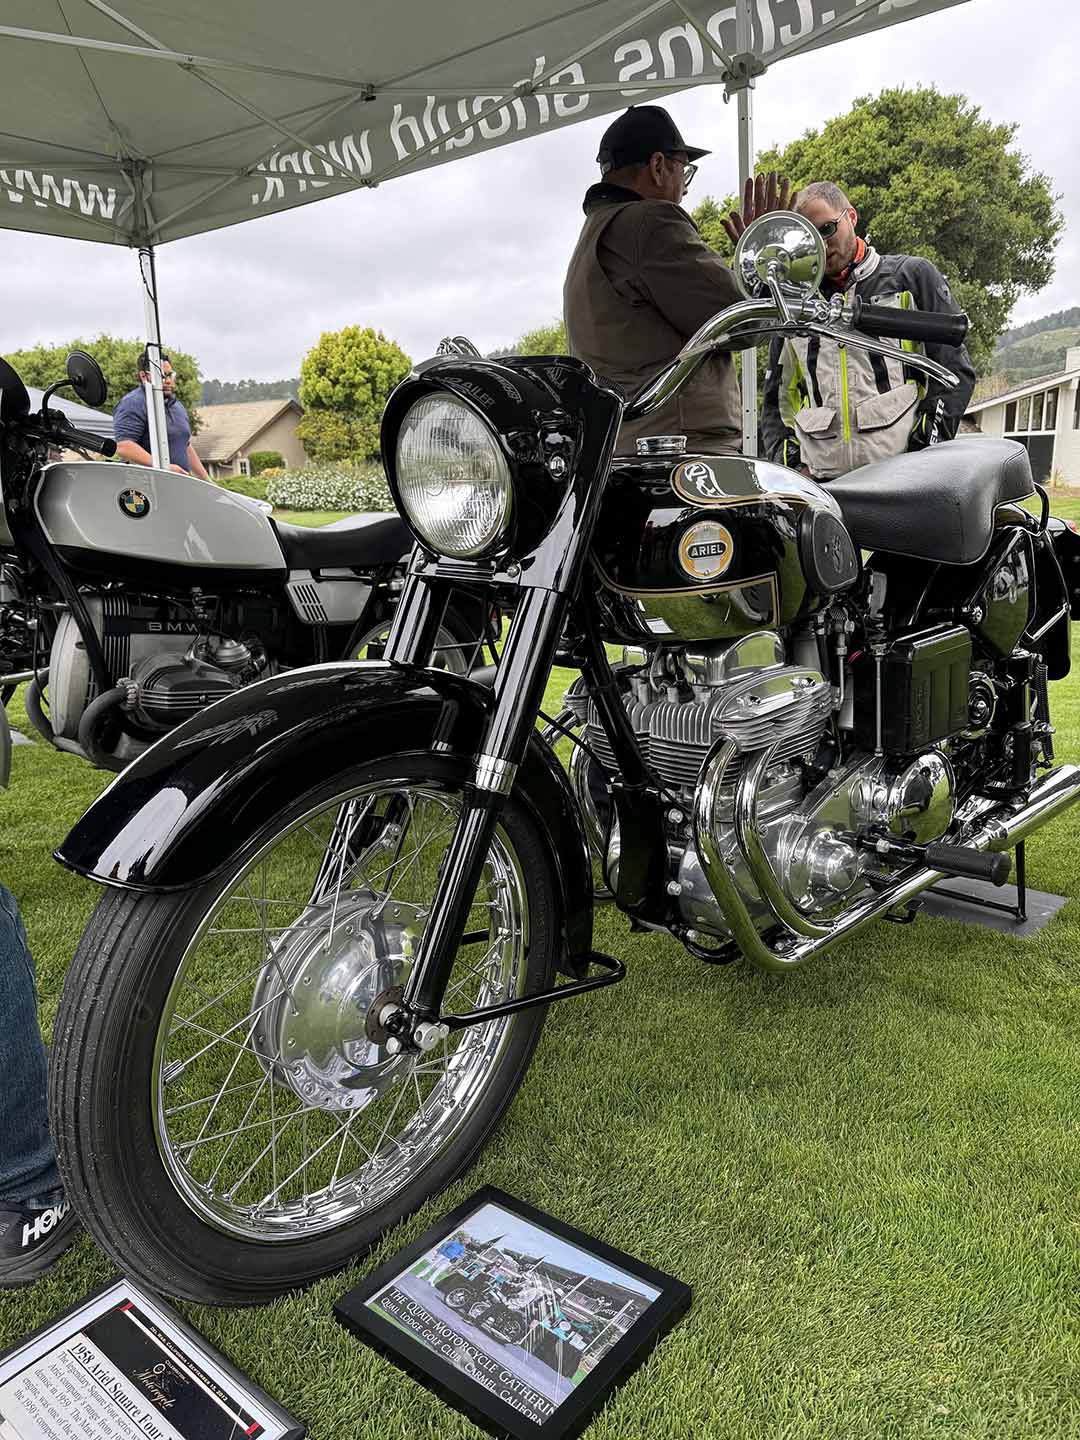 You couldn’t miss this mint 1958 Ariel Square Four, even under a pop-up tent.